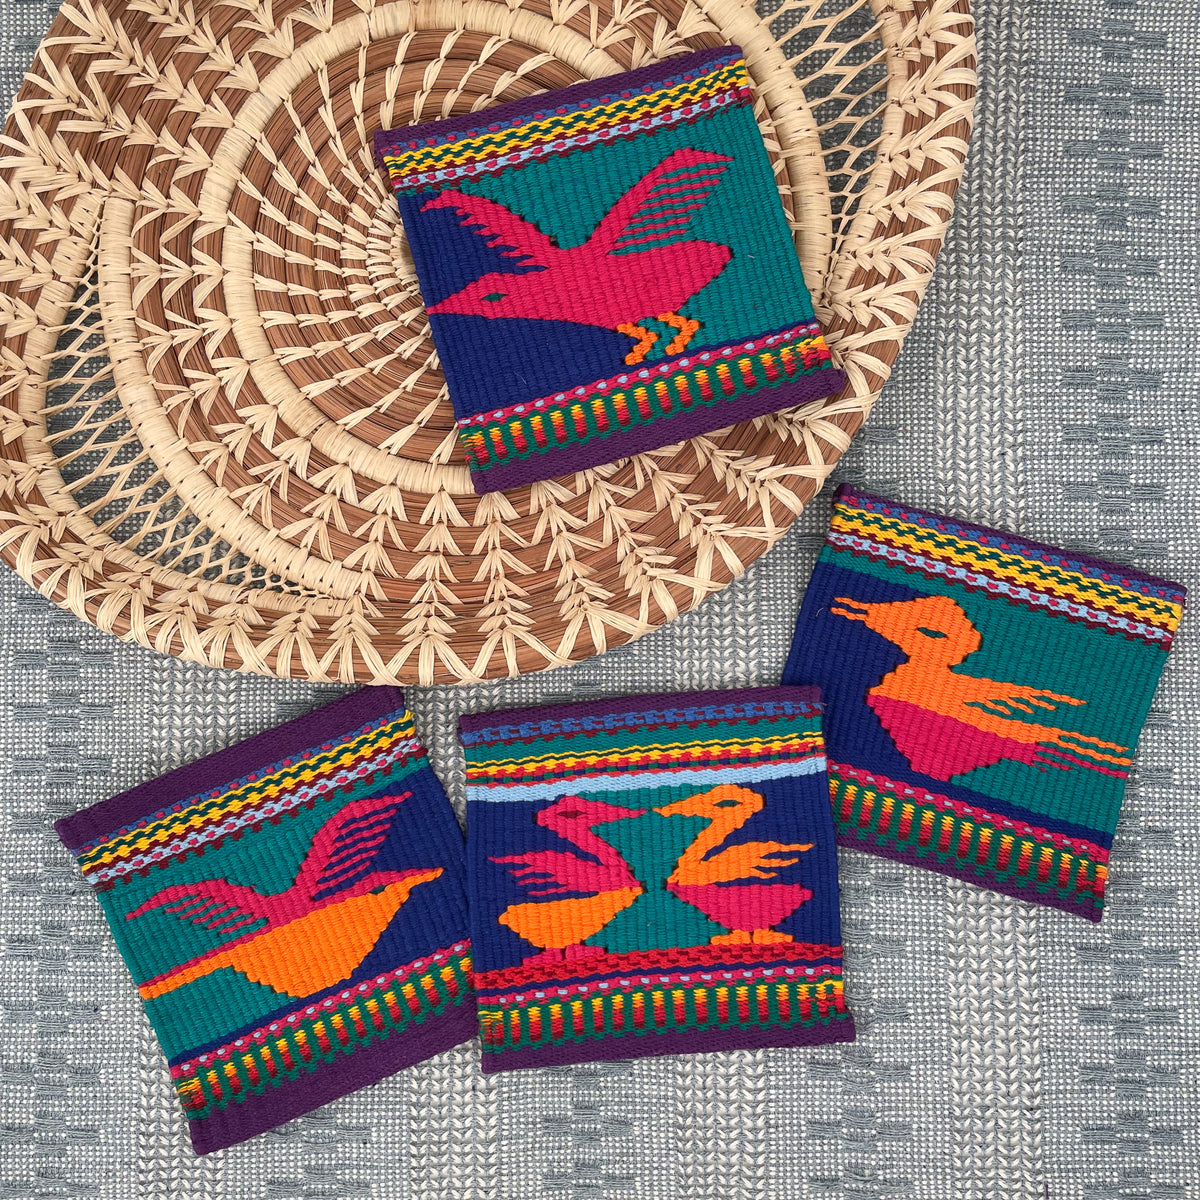 Set of four pajarito coasters displayed over Calado table runner and Angela pine needle basket tray with mesh detail on handles.